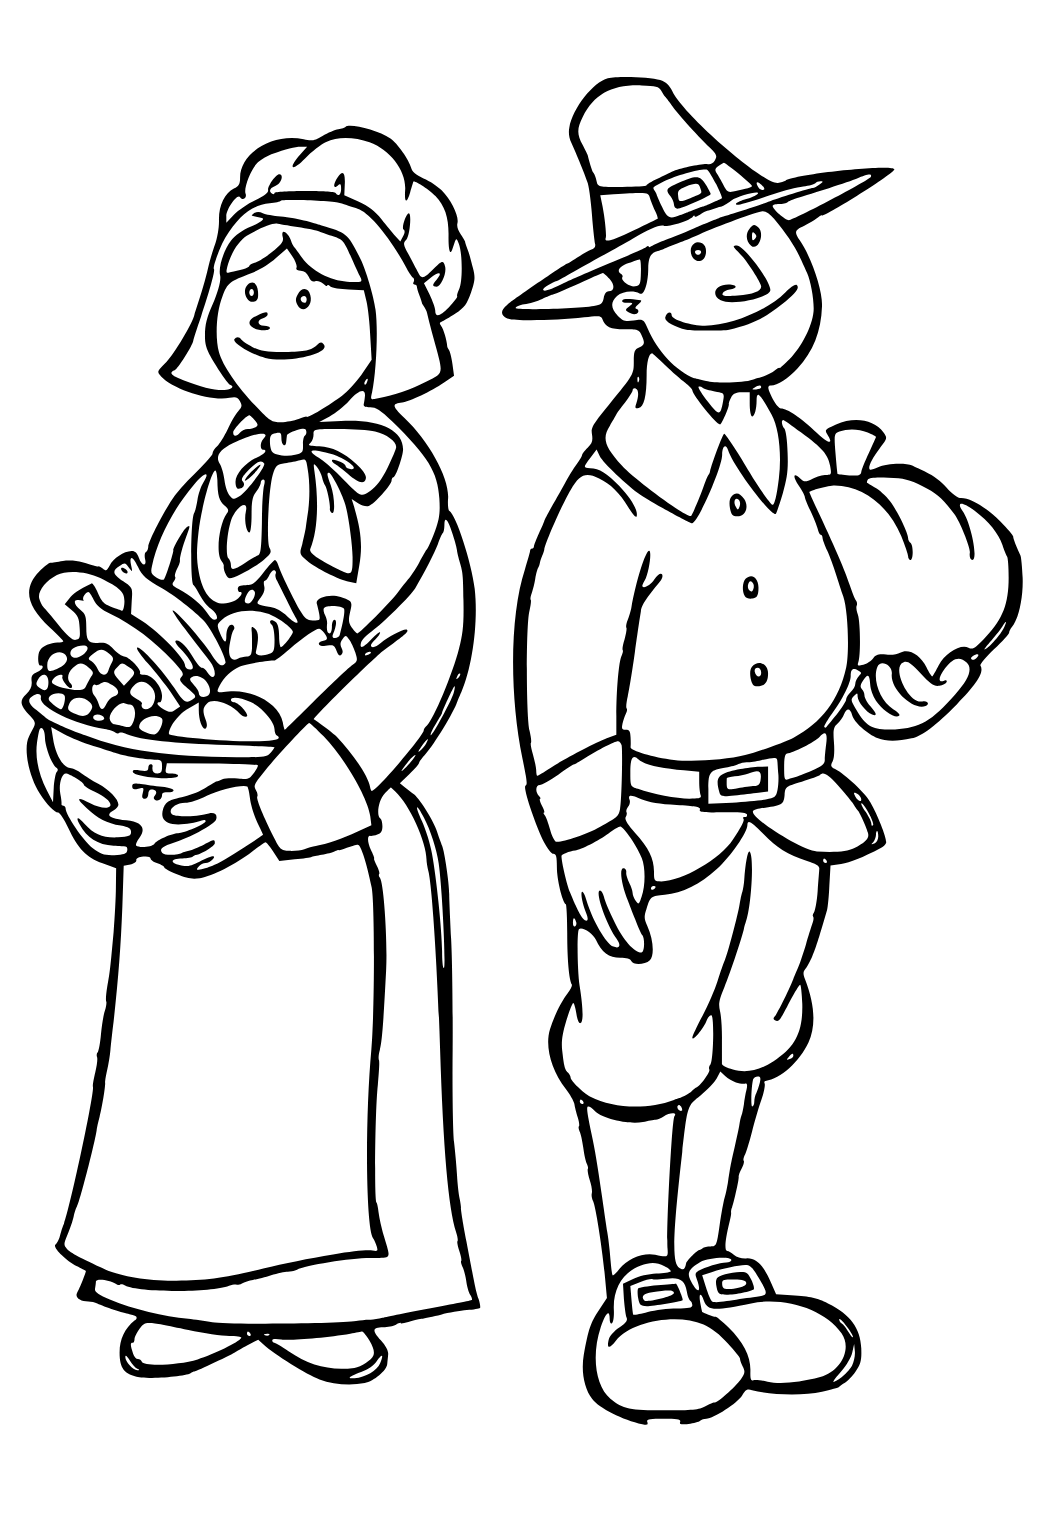 Free printable pilgrim gifts coloring page for adults and kids